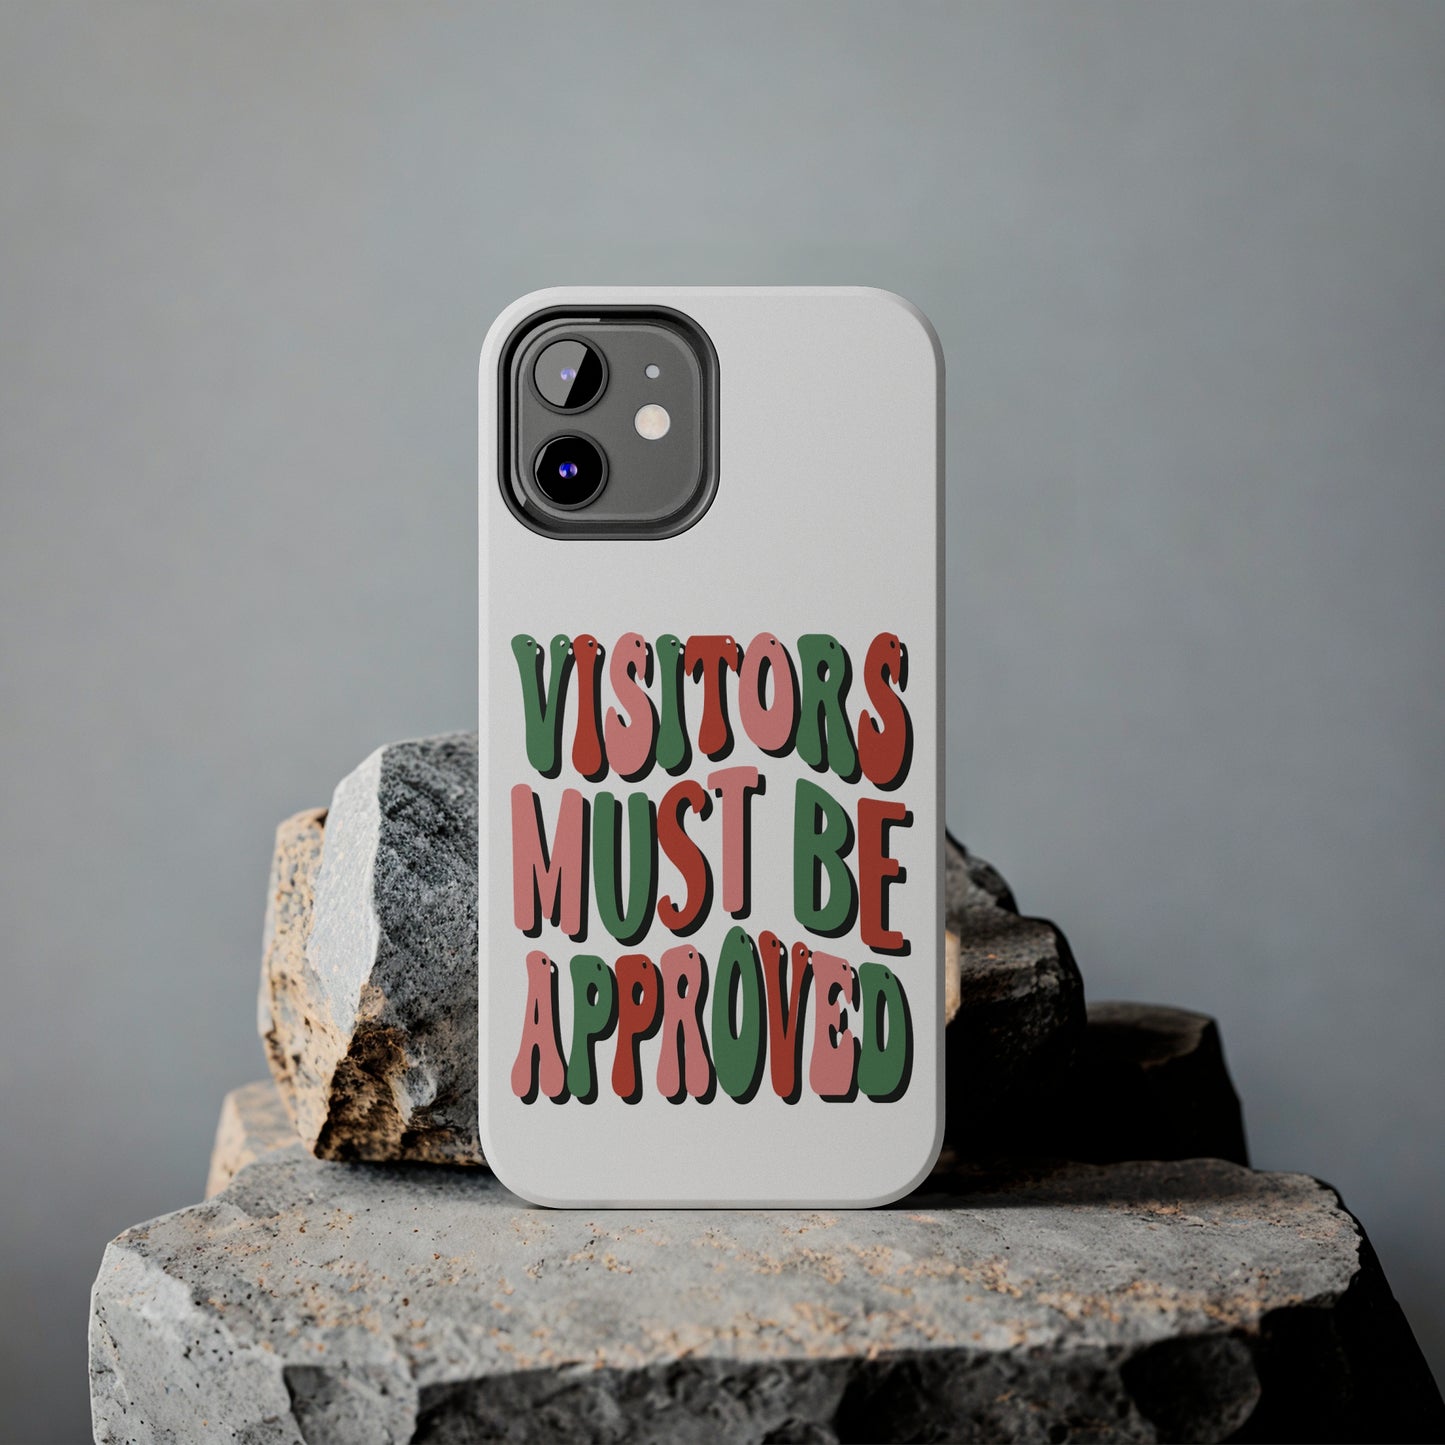 Visitors Must Be Approved: iPhone Tough Case Design - Wireless Charging - Superior Protection - Original Designs by TheGlassyLass.com